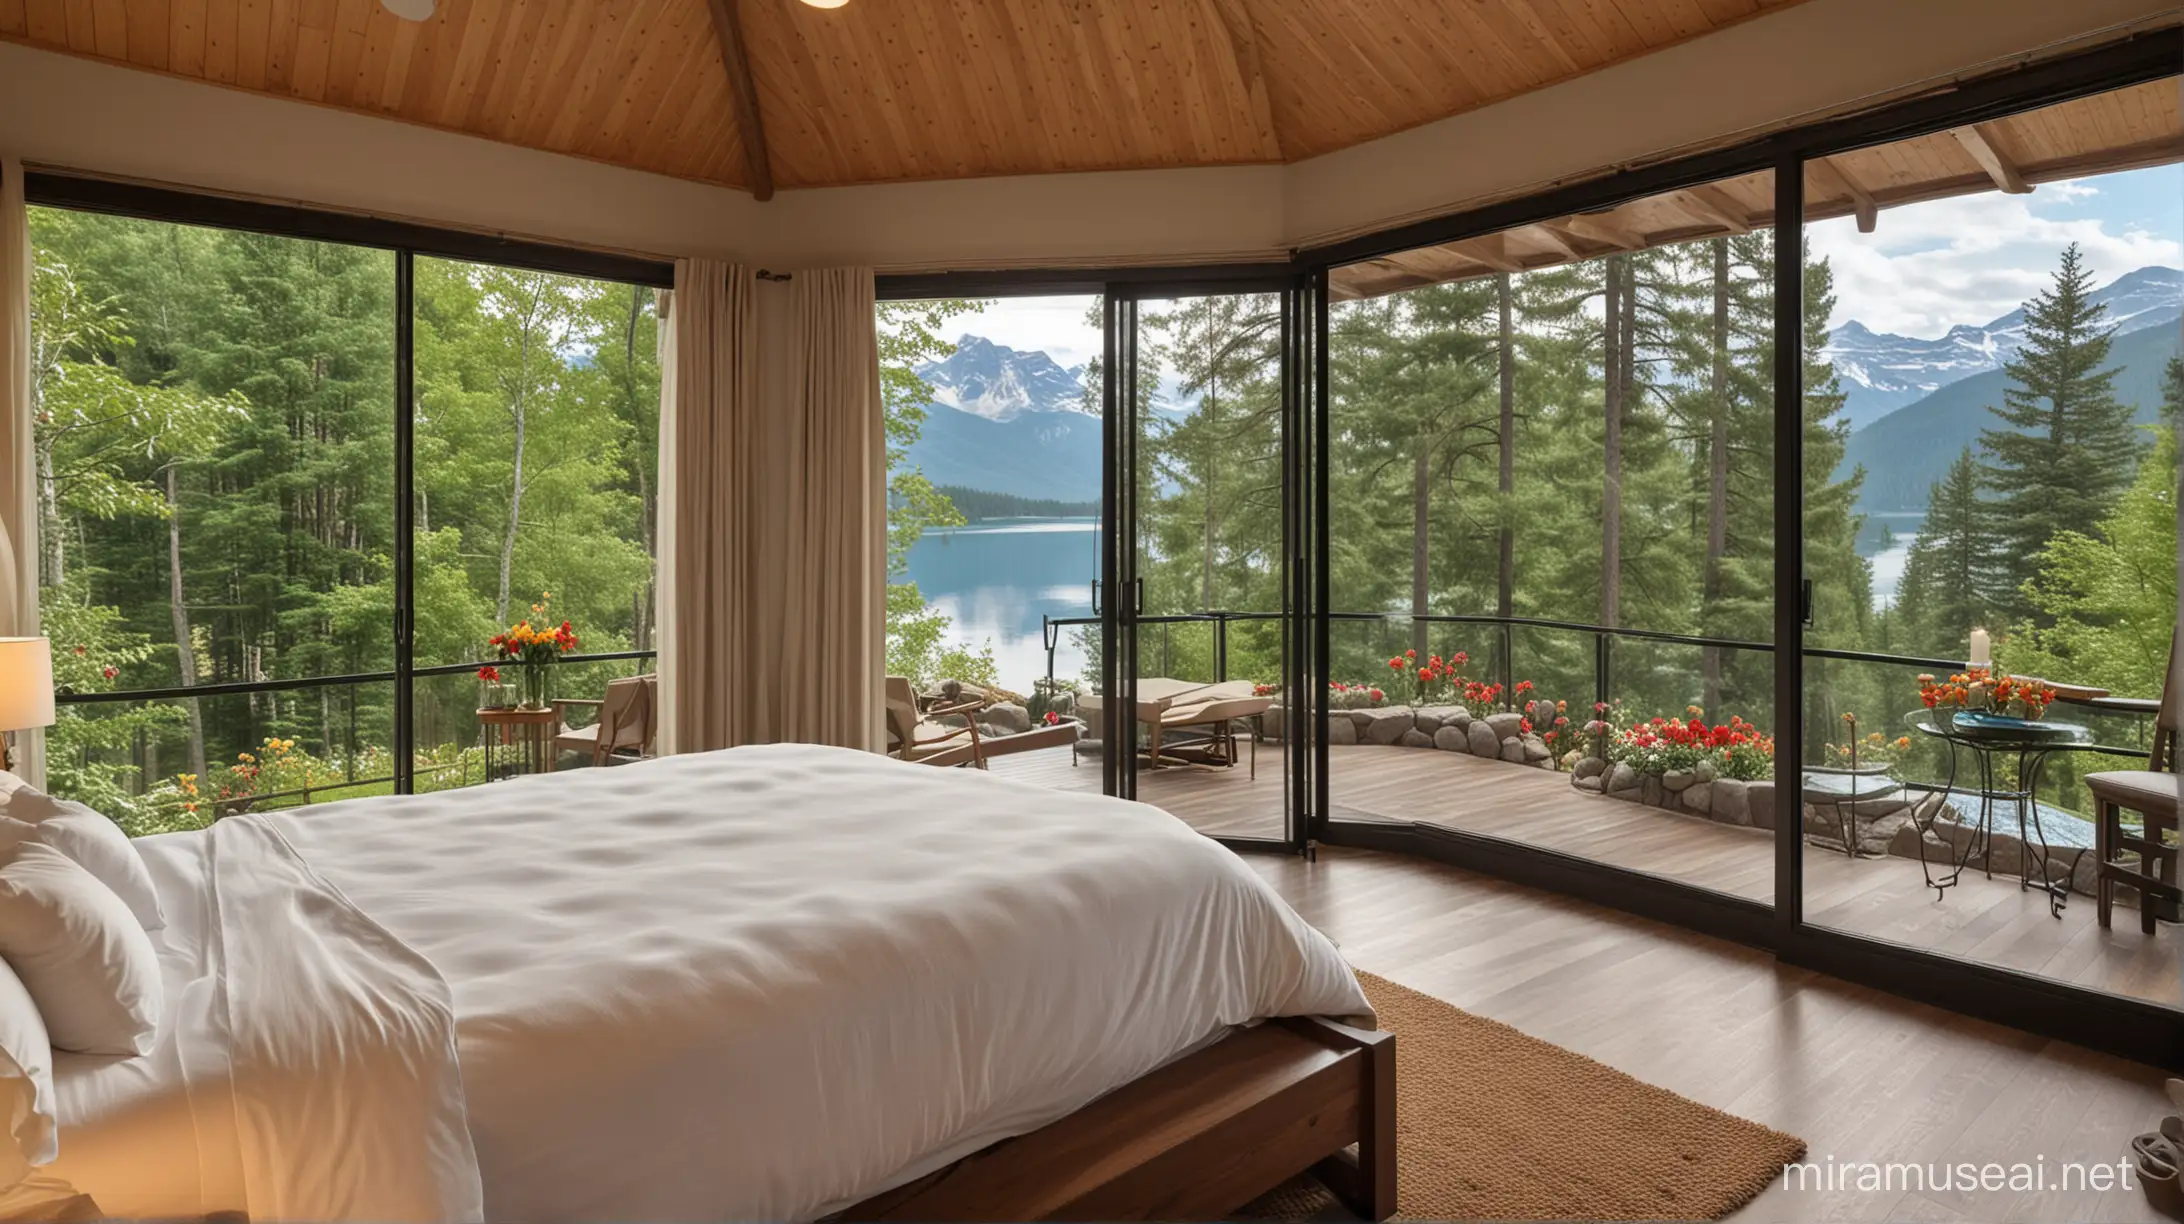 A resort bedroom from where you can see tranquil water of lake and mountain views and forest. Inside room there should be bed, table on which candle, fruits, juice in bear glass. Beside the room flower garden, leaf handing from top .